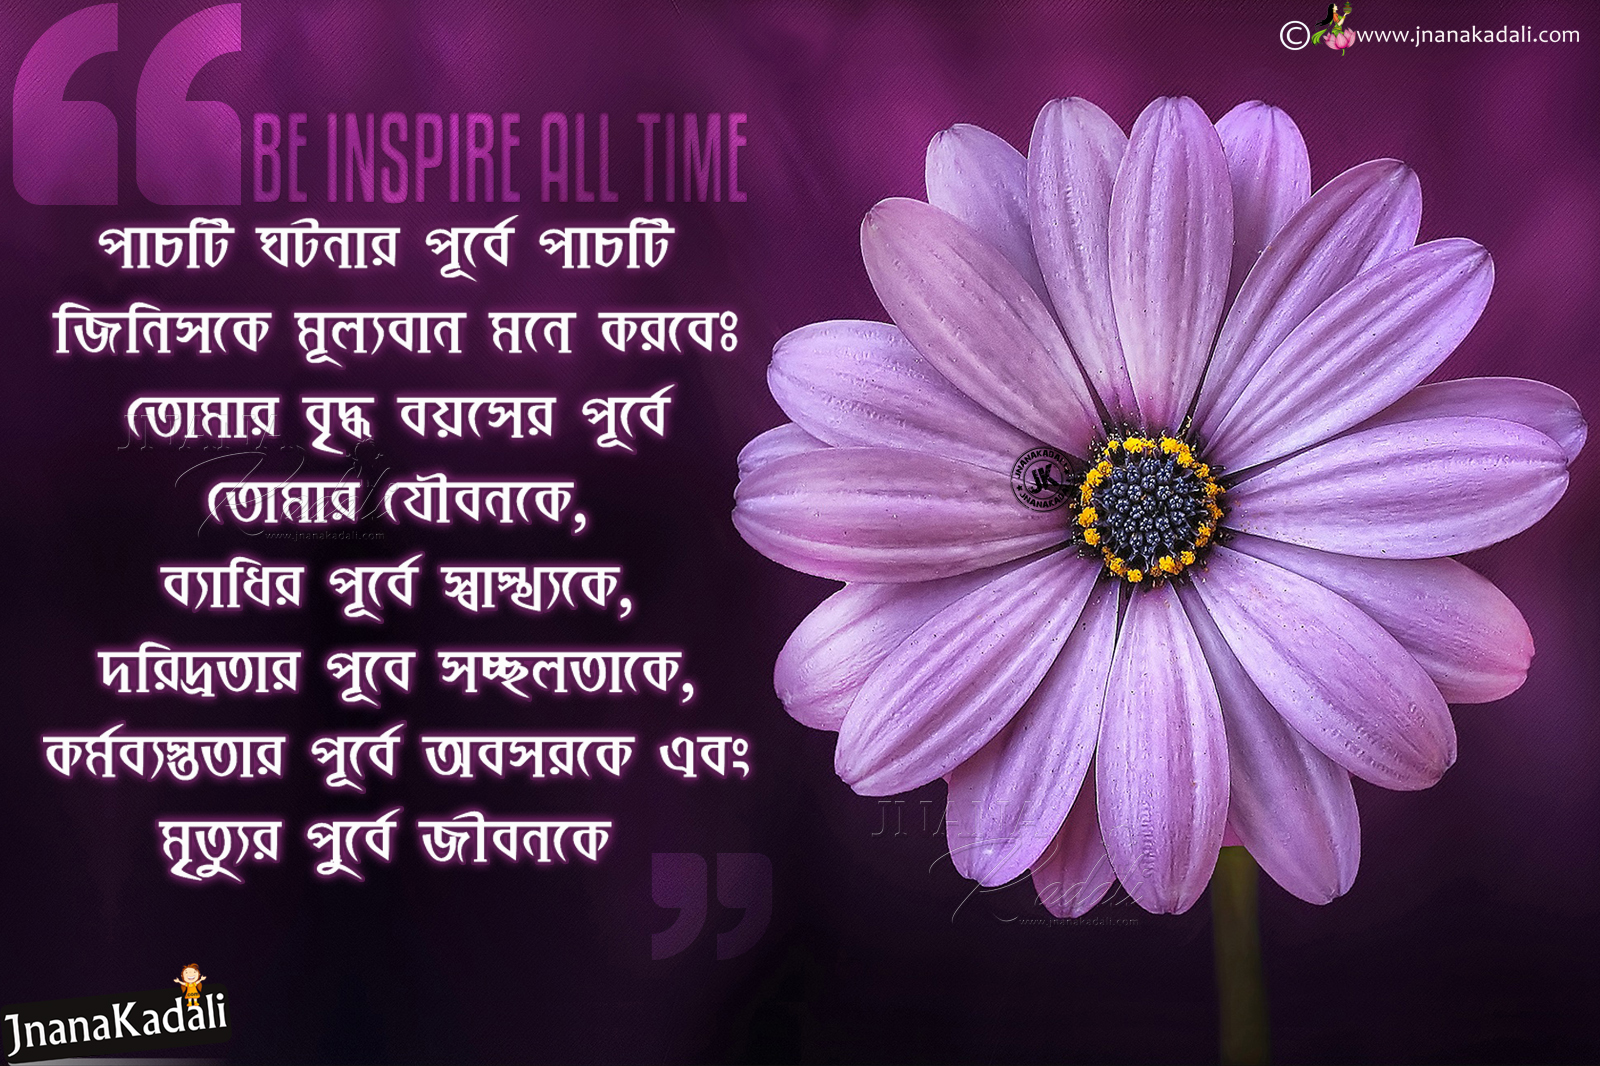 Inspirational and motivational quotes thoughts messages in bengali ...